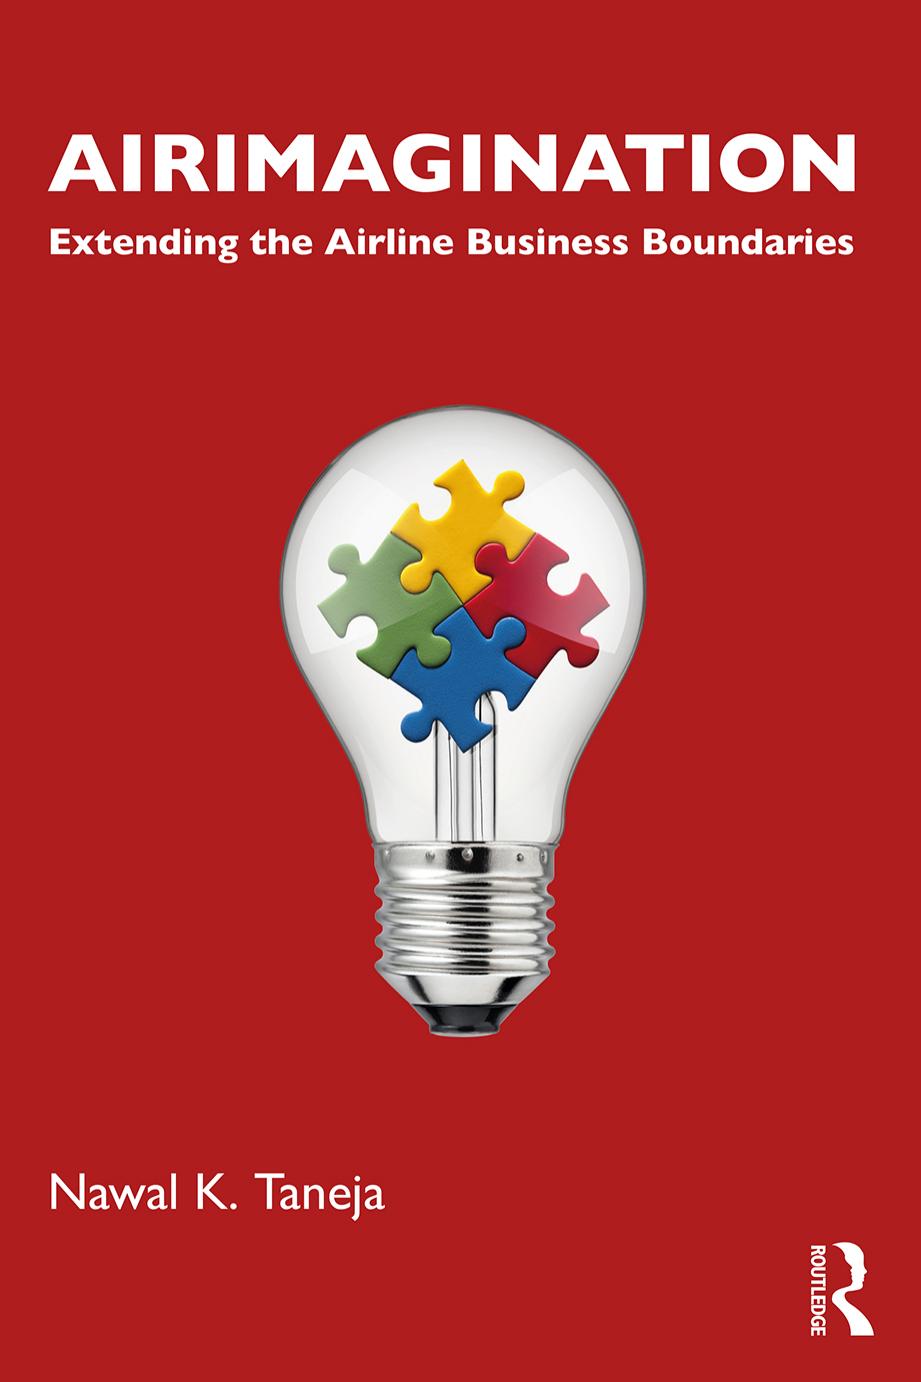 Airimagination: Extending the Airline Business Boundaries by Nawal K. Taneja